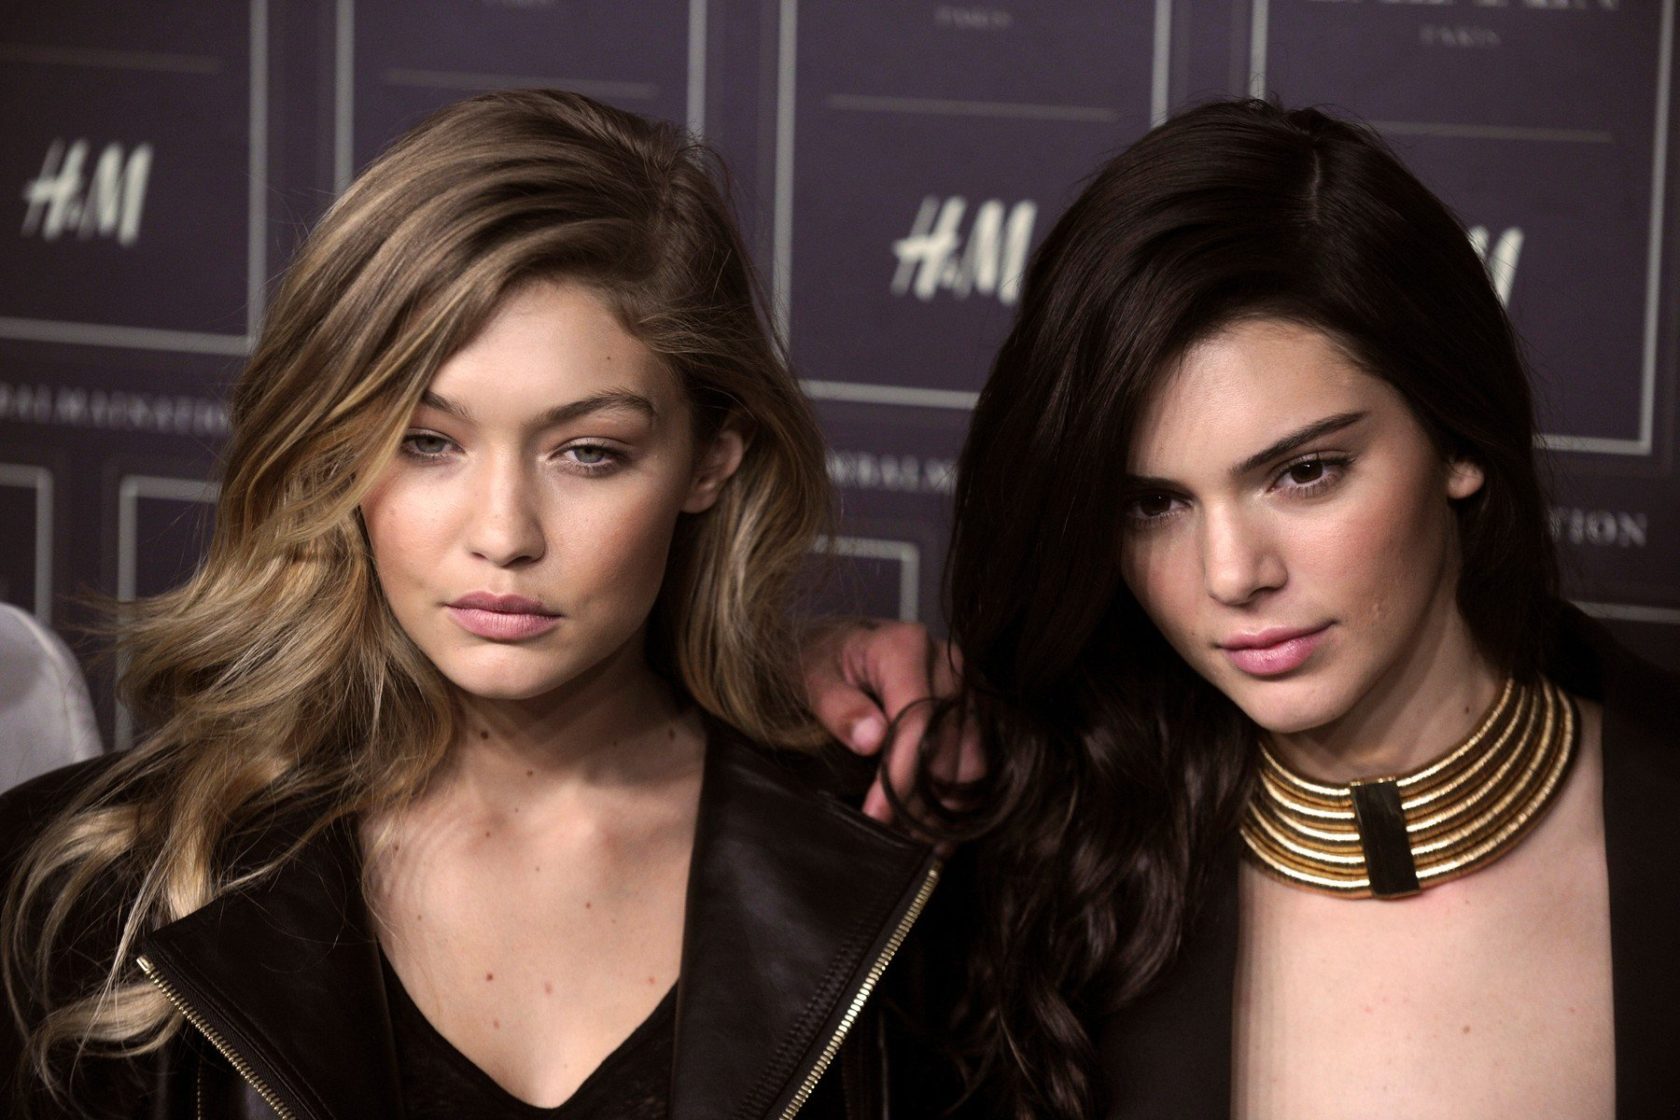 Oct. 21, 2015 - New York, New York, USA - Gigi Hadid and Kendall Jenner attend the Balmain x H&M collection show at 23 Wall Street on October 20, 2015 in New York City., Image: 263462534, License: Rights-managed, Restrictions: , Model Release: no, Credit line: Profimedia, Zuma Press - Entertaiment